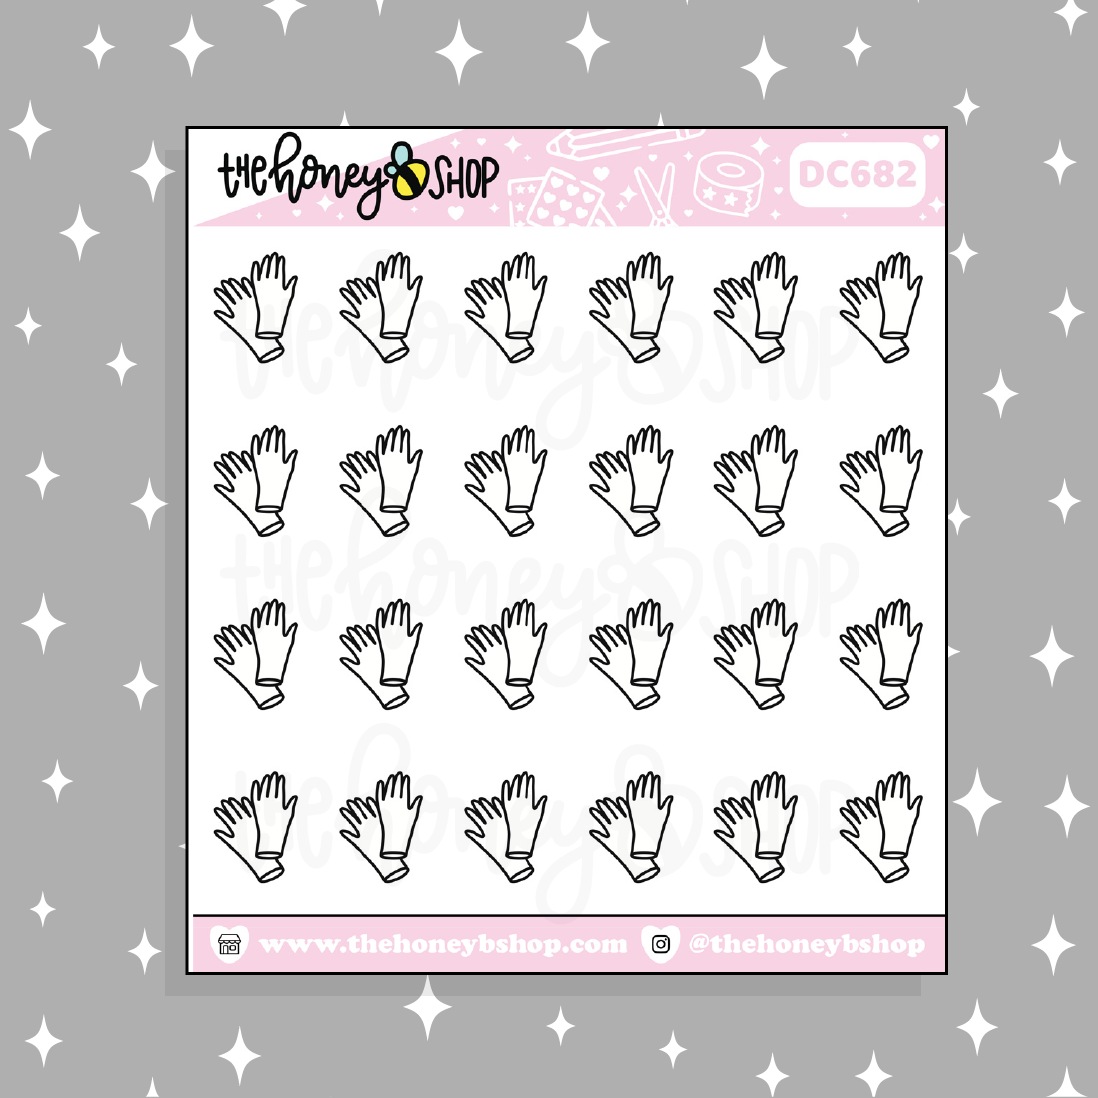 Cleaning Gloves Doodle Sticker | Choose Your Color Option!